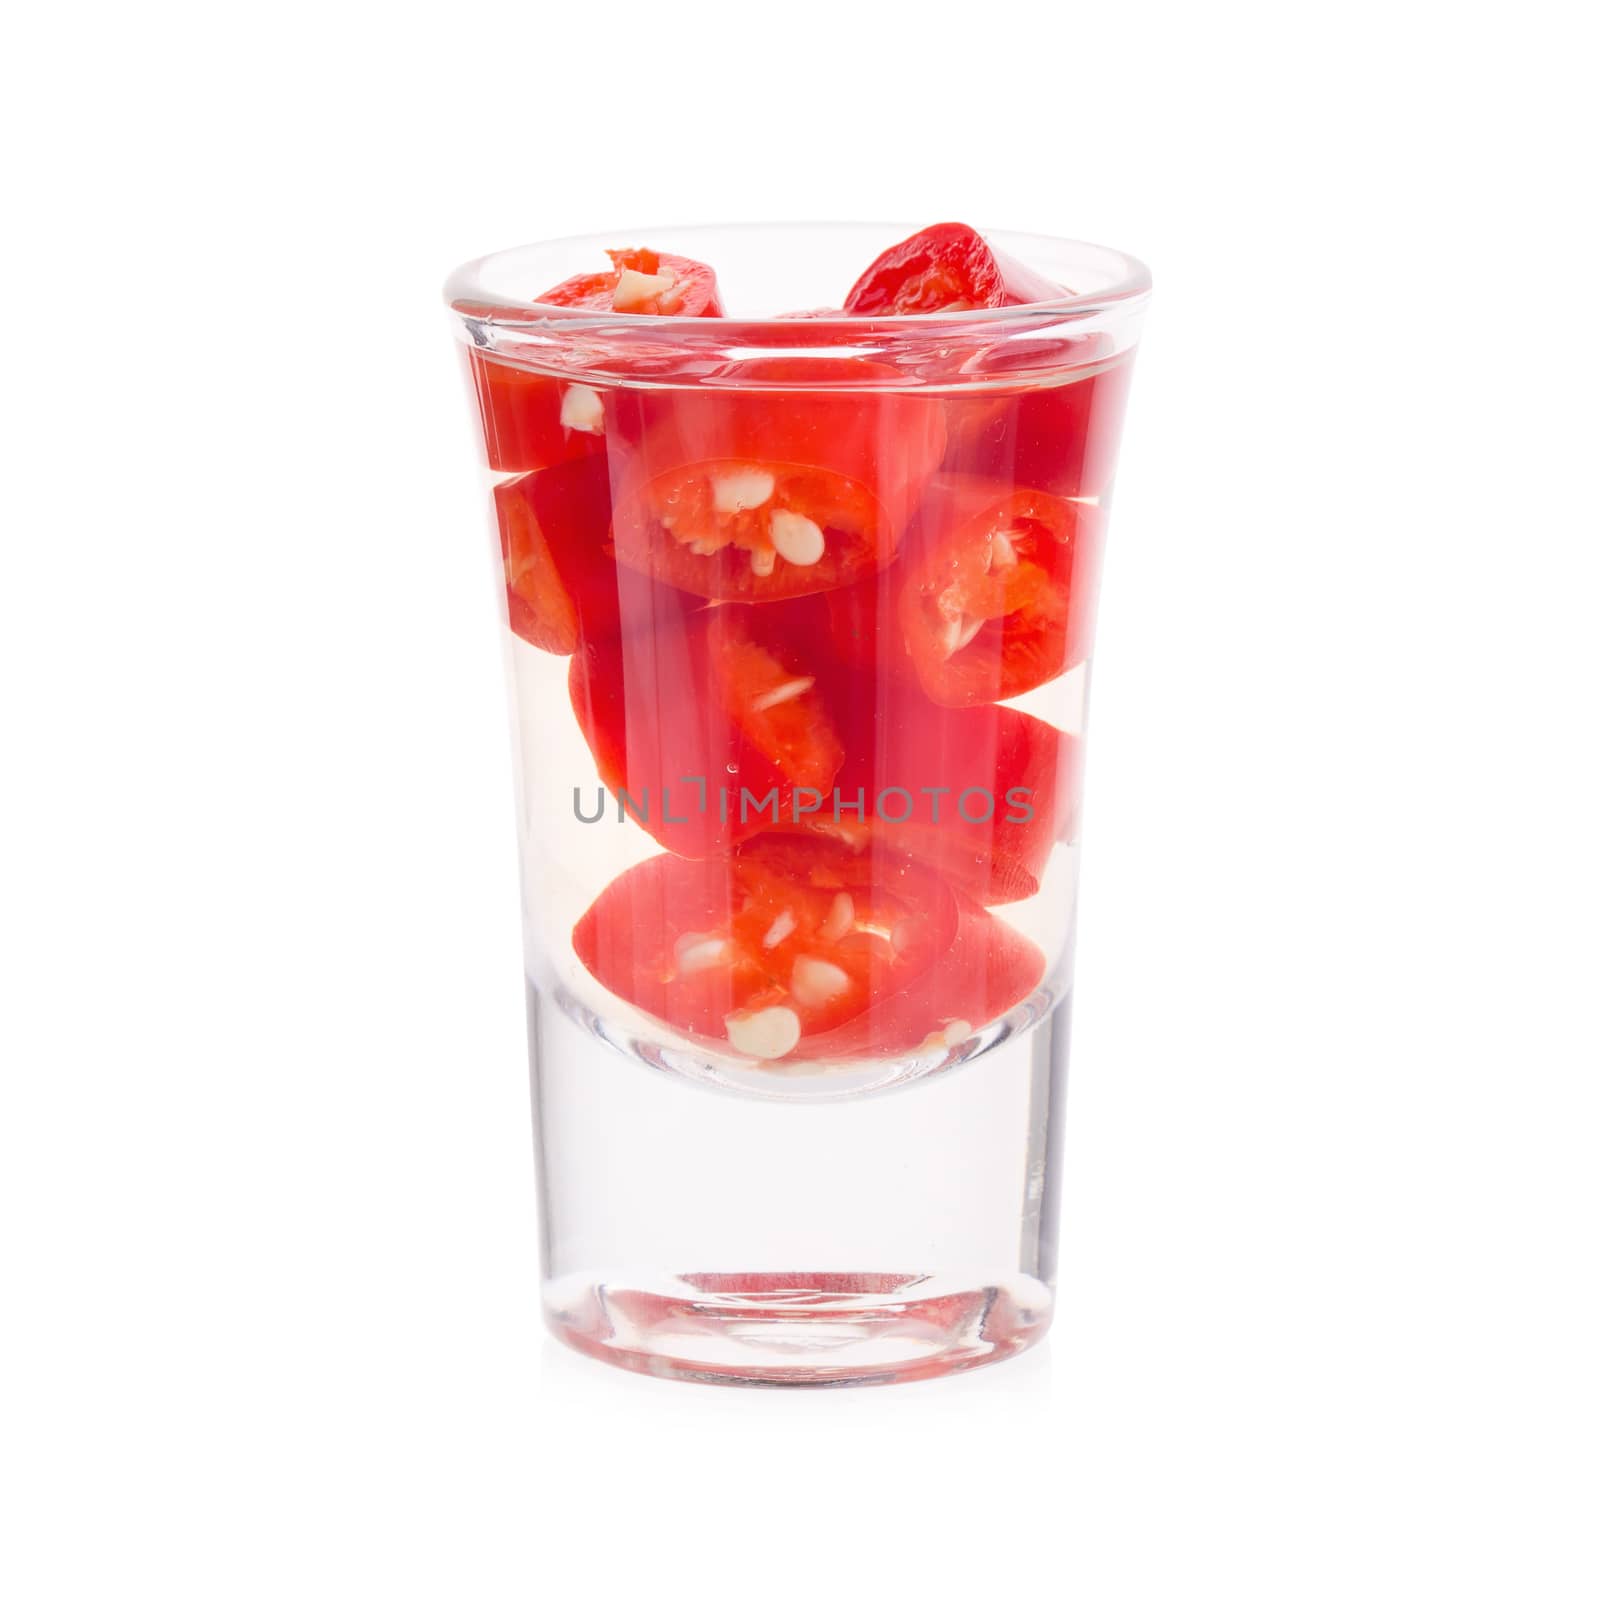 Slices of preserved red hot pepper in glass isolated on a white background.